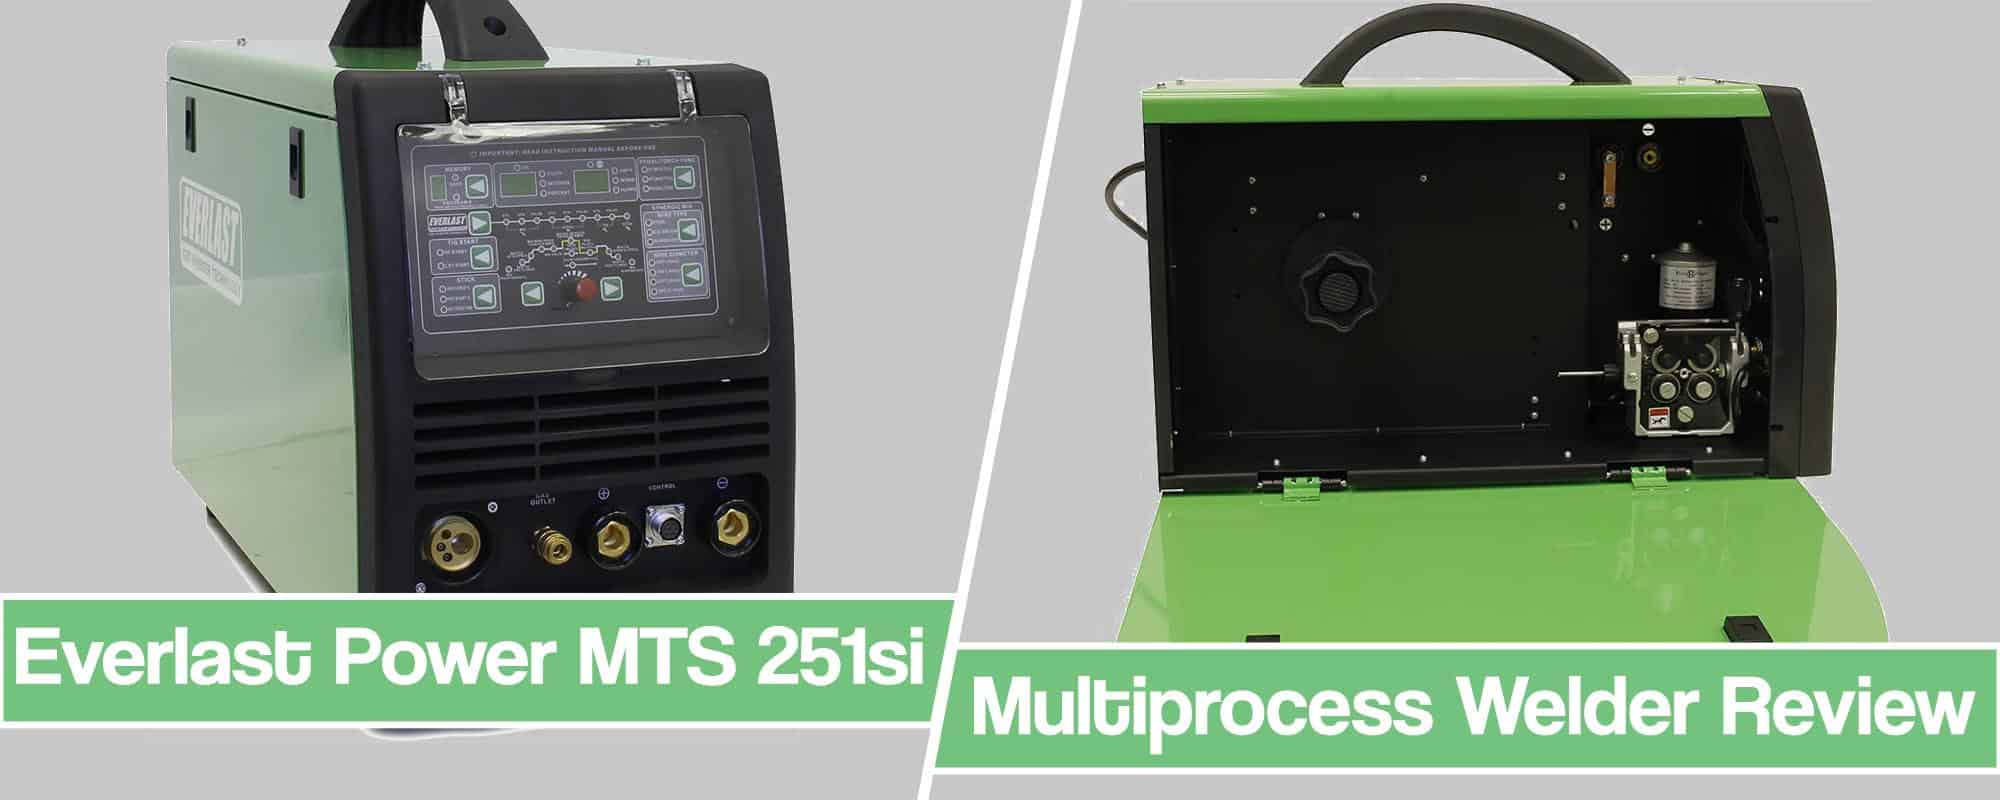 Everlast PowerMTS 251si Review – Multi Process Welder That Does MIG/TIG and Stick